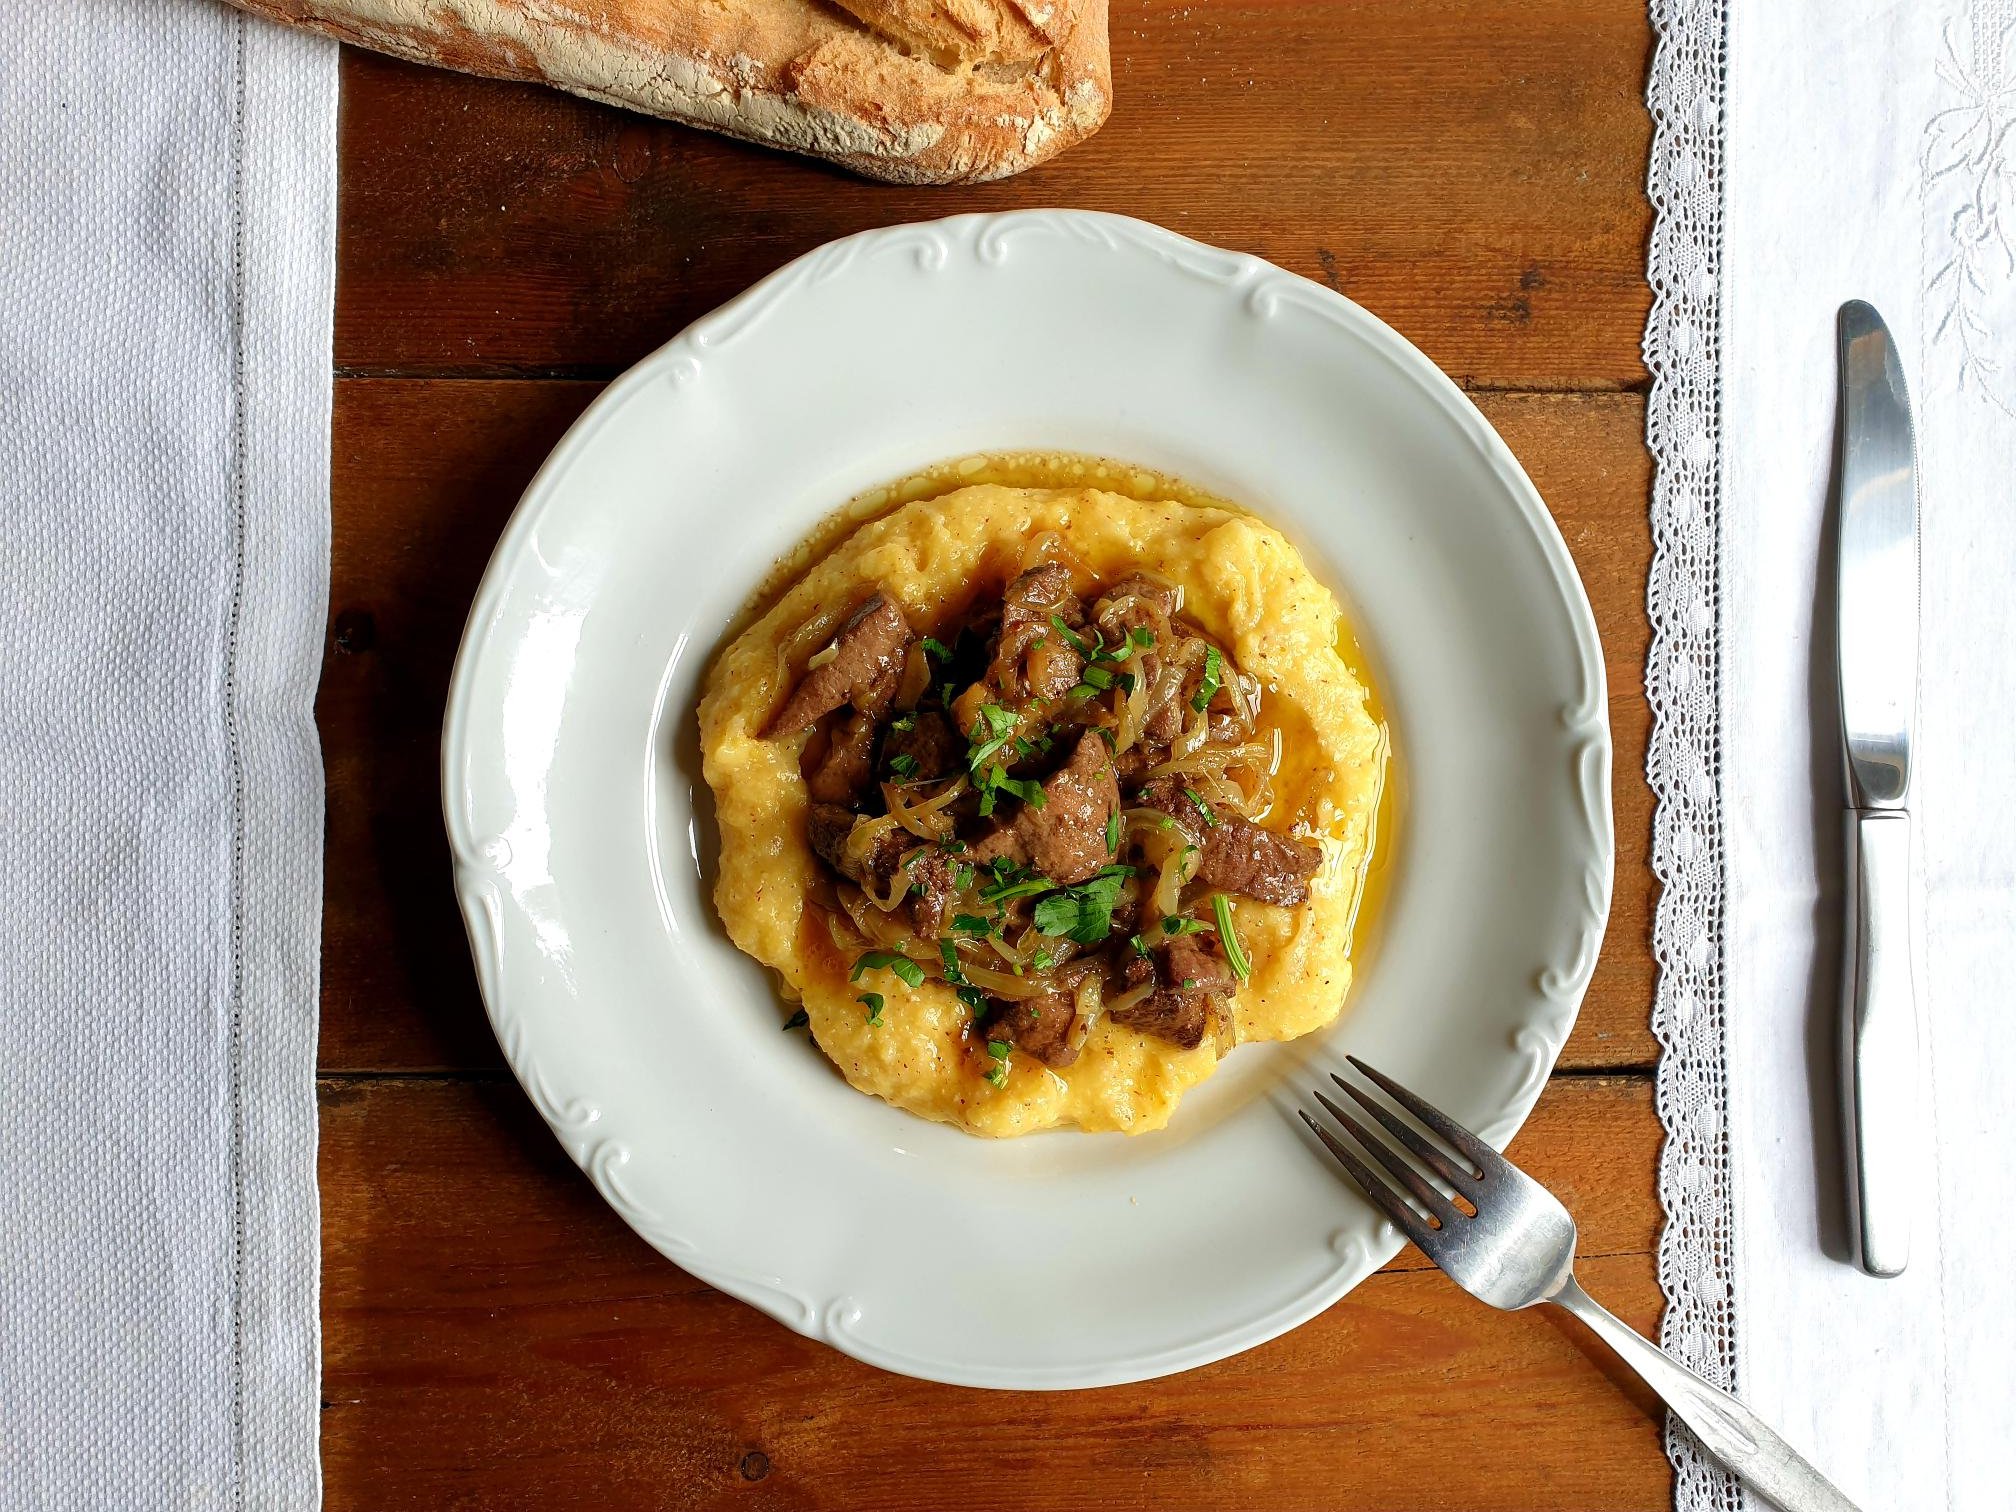 Venetian-style Calf's liver with caramelised onions Recipe